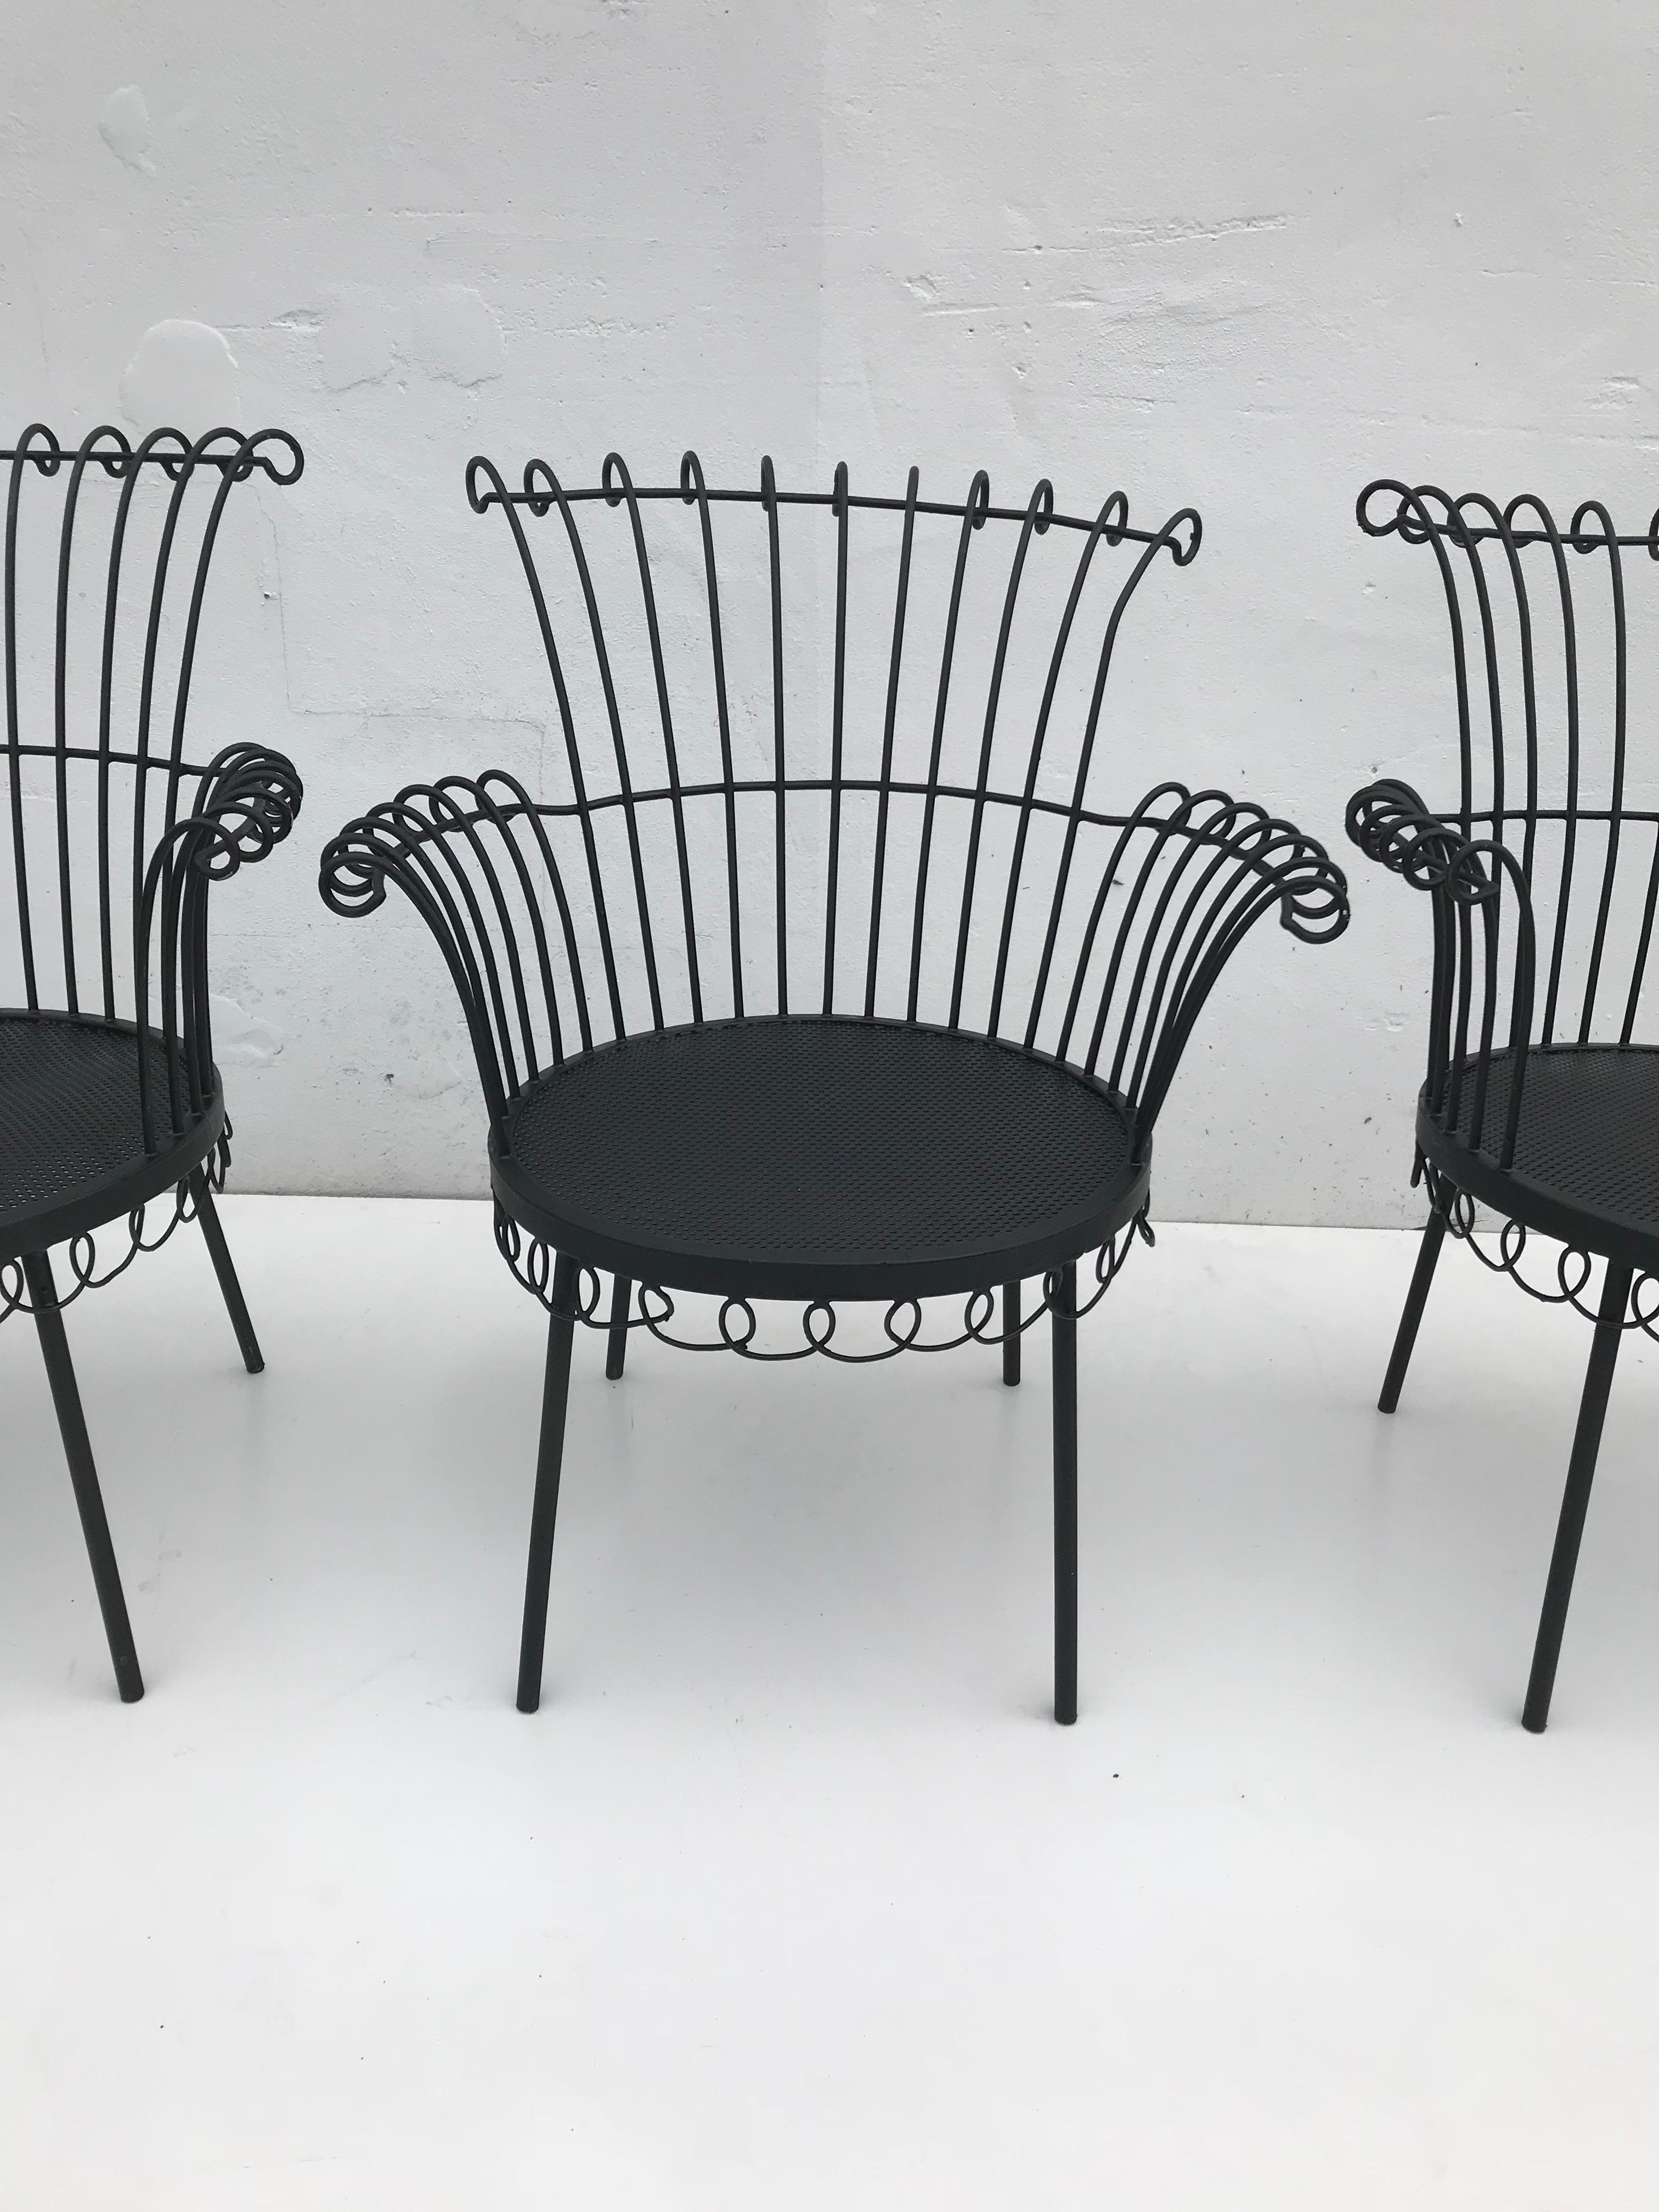 Superb set of 4 chairs model Cap D’ail attributed to Mathieu Mategot
Can be use inside or outside.
Newly relacquered in flat black.
Measurements seat: 15